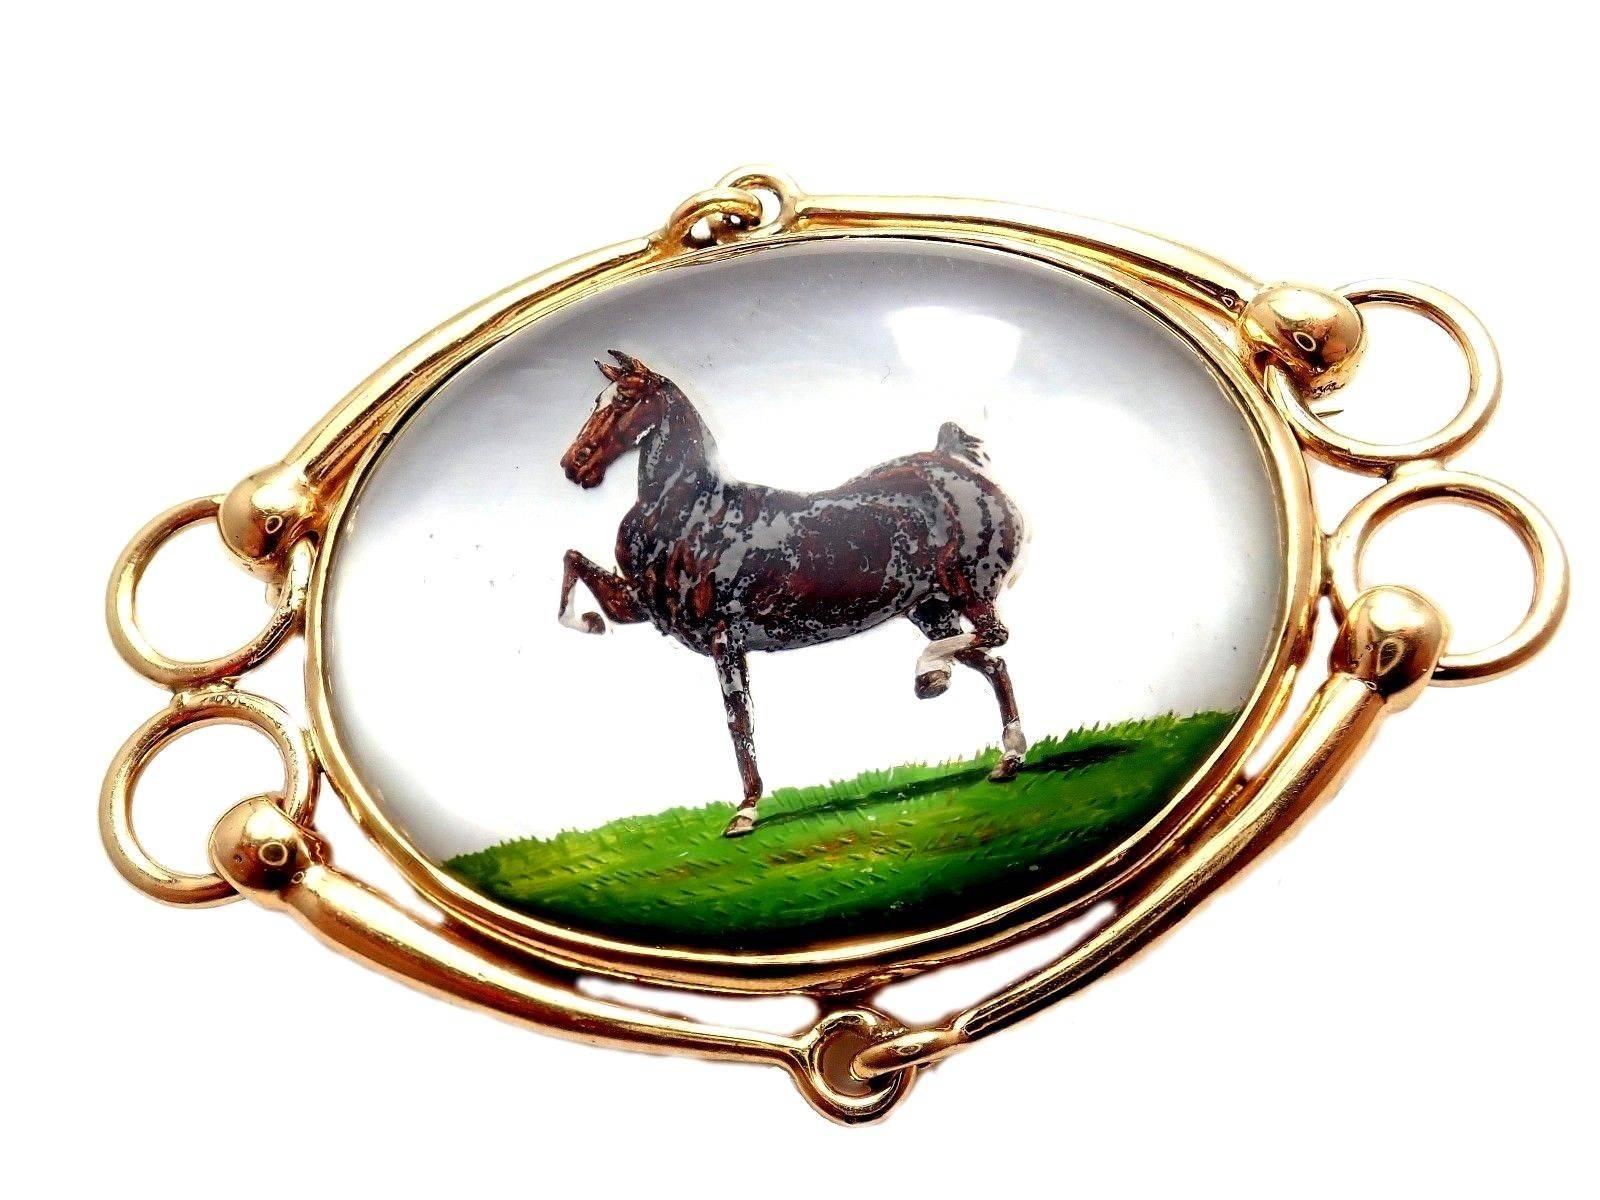 14k Yellow Gold Essex Crystal Reverse Intaglio Horse Brooch Pin by JE Caldwell & Co.
With domed oval shape rock crystal.
Details: 
Weight: 26.8 grams
Measurements: 53mm x 38mm
Stamped Hallmarks:  14k JE C & Co.
*Free Shipping within the United